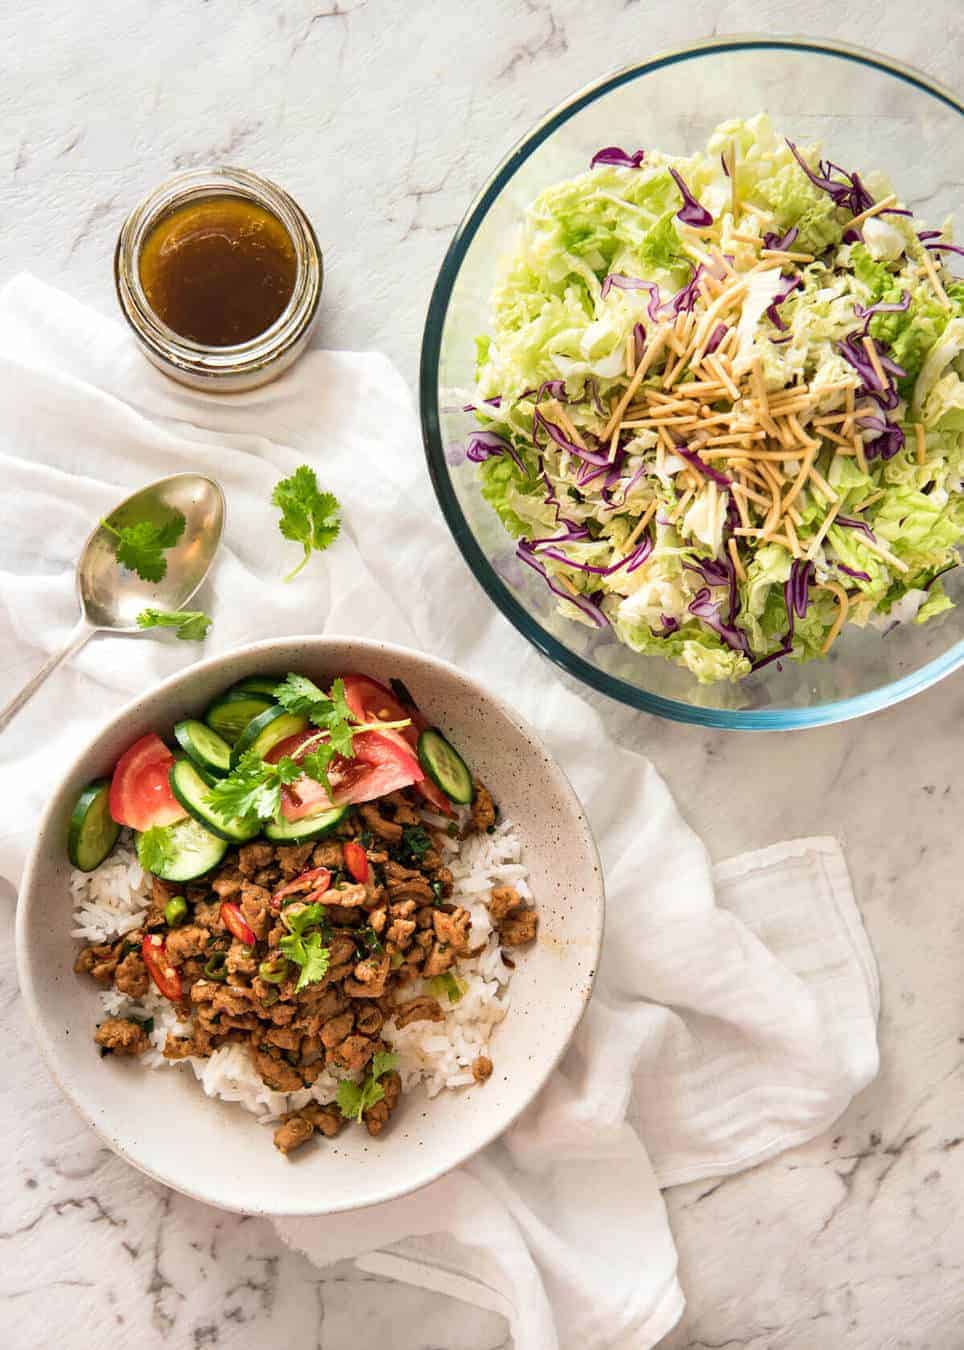 A fantastic Thai Stir Fry Sauce used to make a quick easy Thai Stir Fry using chicken, turkey or pork - ground or bite-size pieces. Classic REAL Thai, super fast healthy dinner!